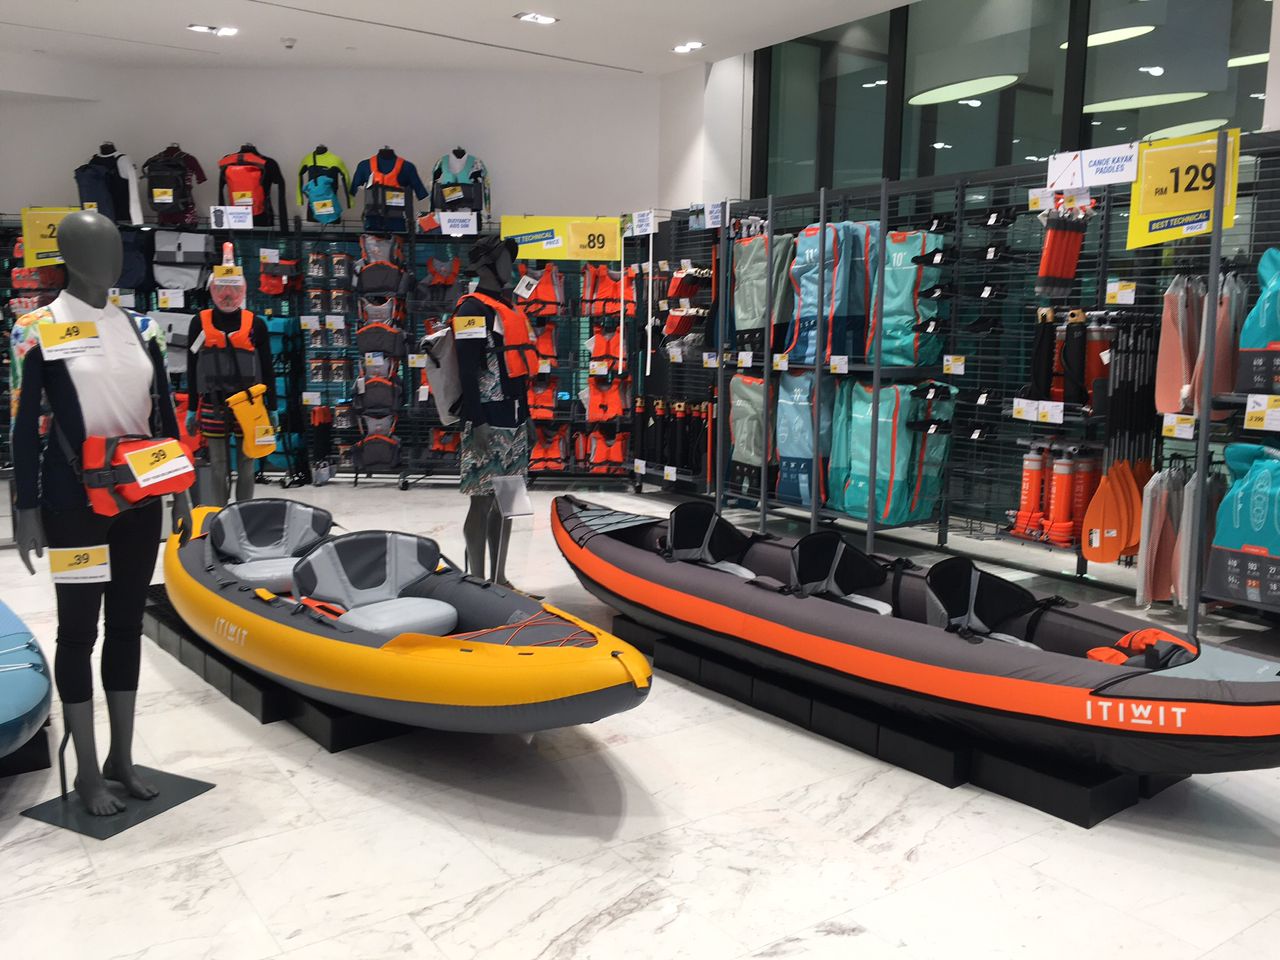 decathlons-new-flagship-store-in-shoppes-at-four-seasons-place-kayak